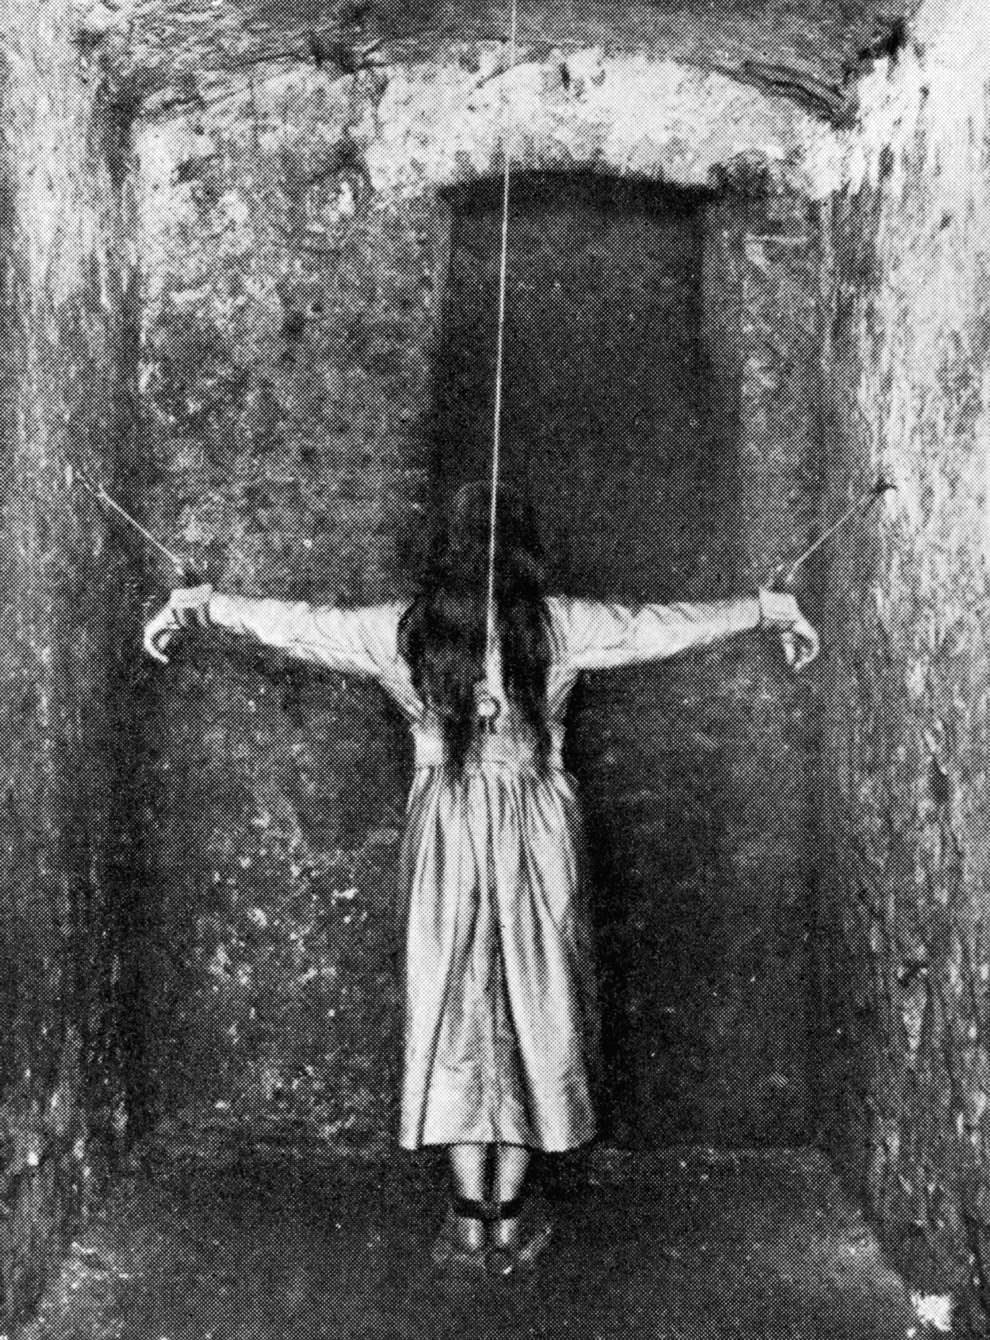 A patient in a mental institution in France, 1900.